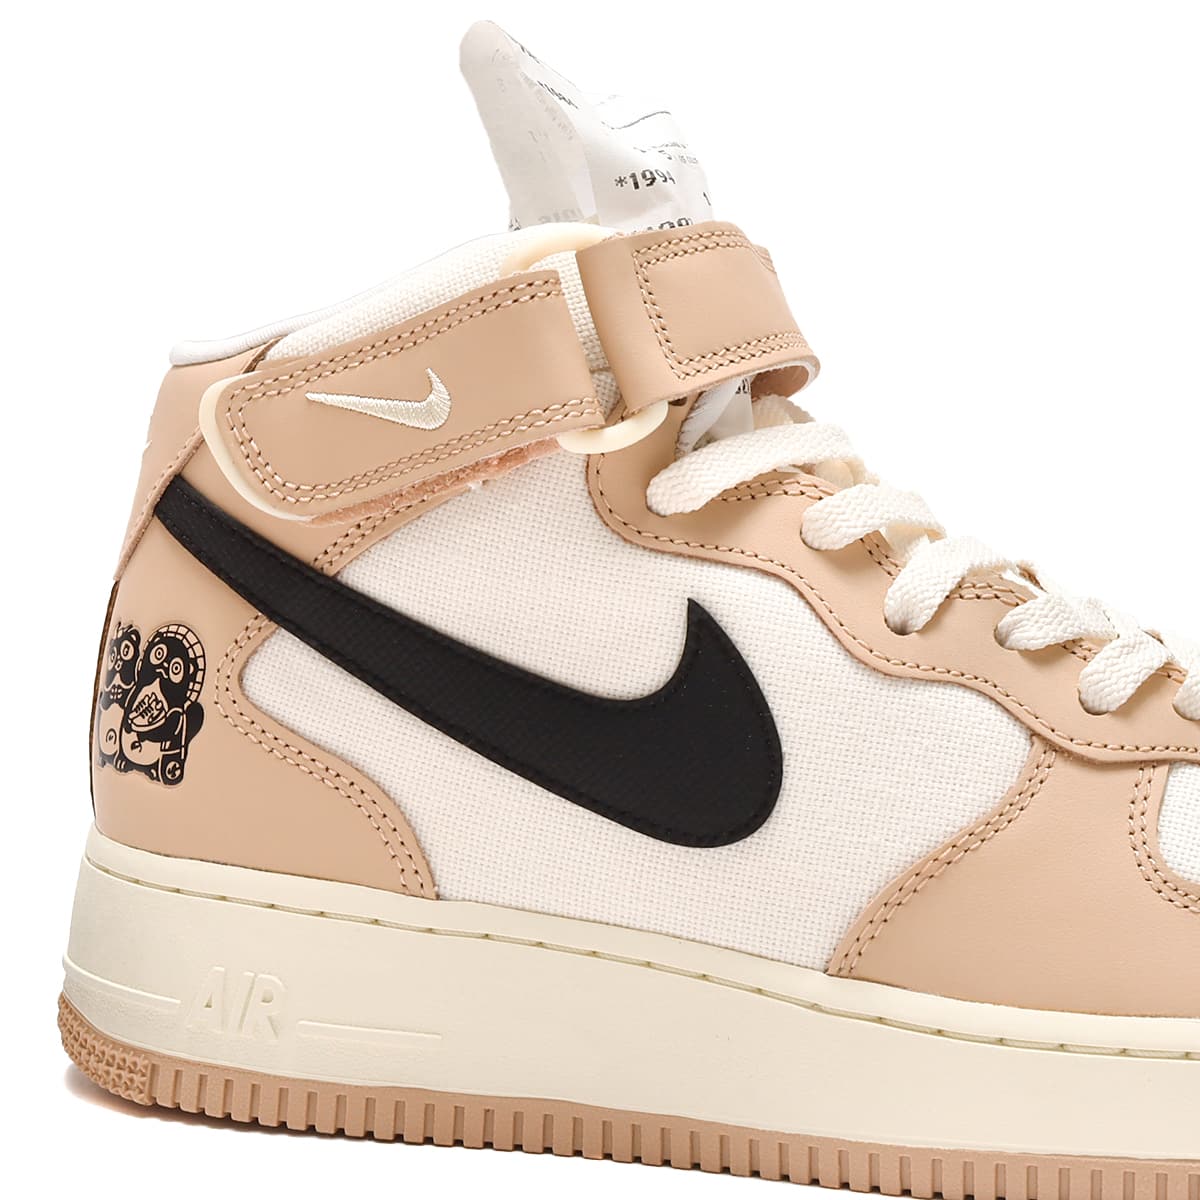 NIKE AIR FORCE 1 MID '07 LX SHIMMER/BLACK-PALE IVORY-COCONUT MILK